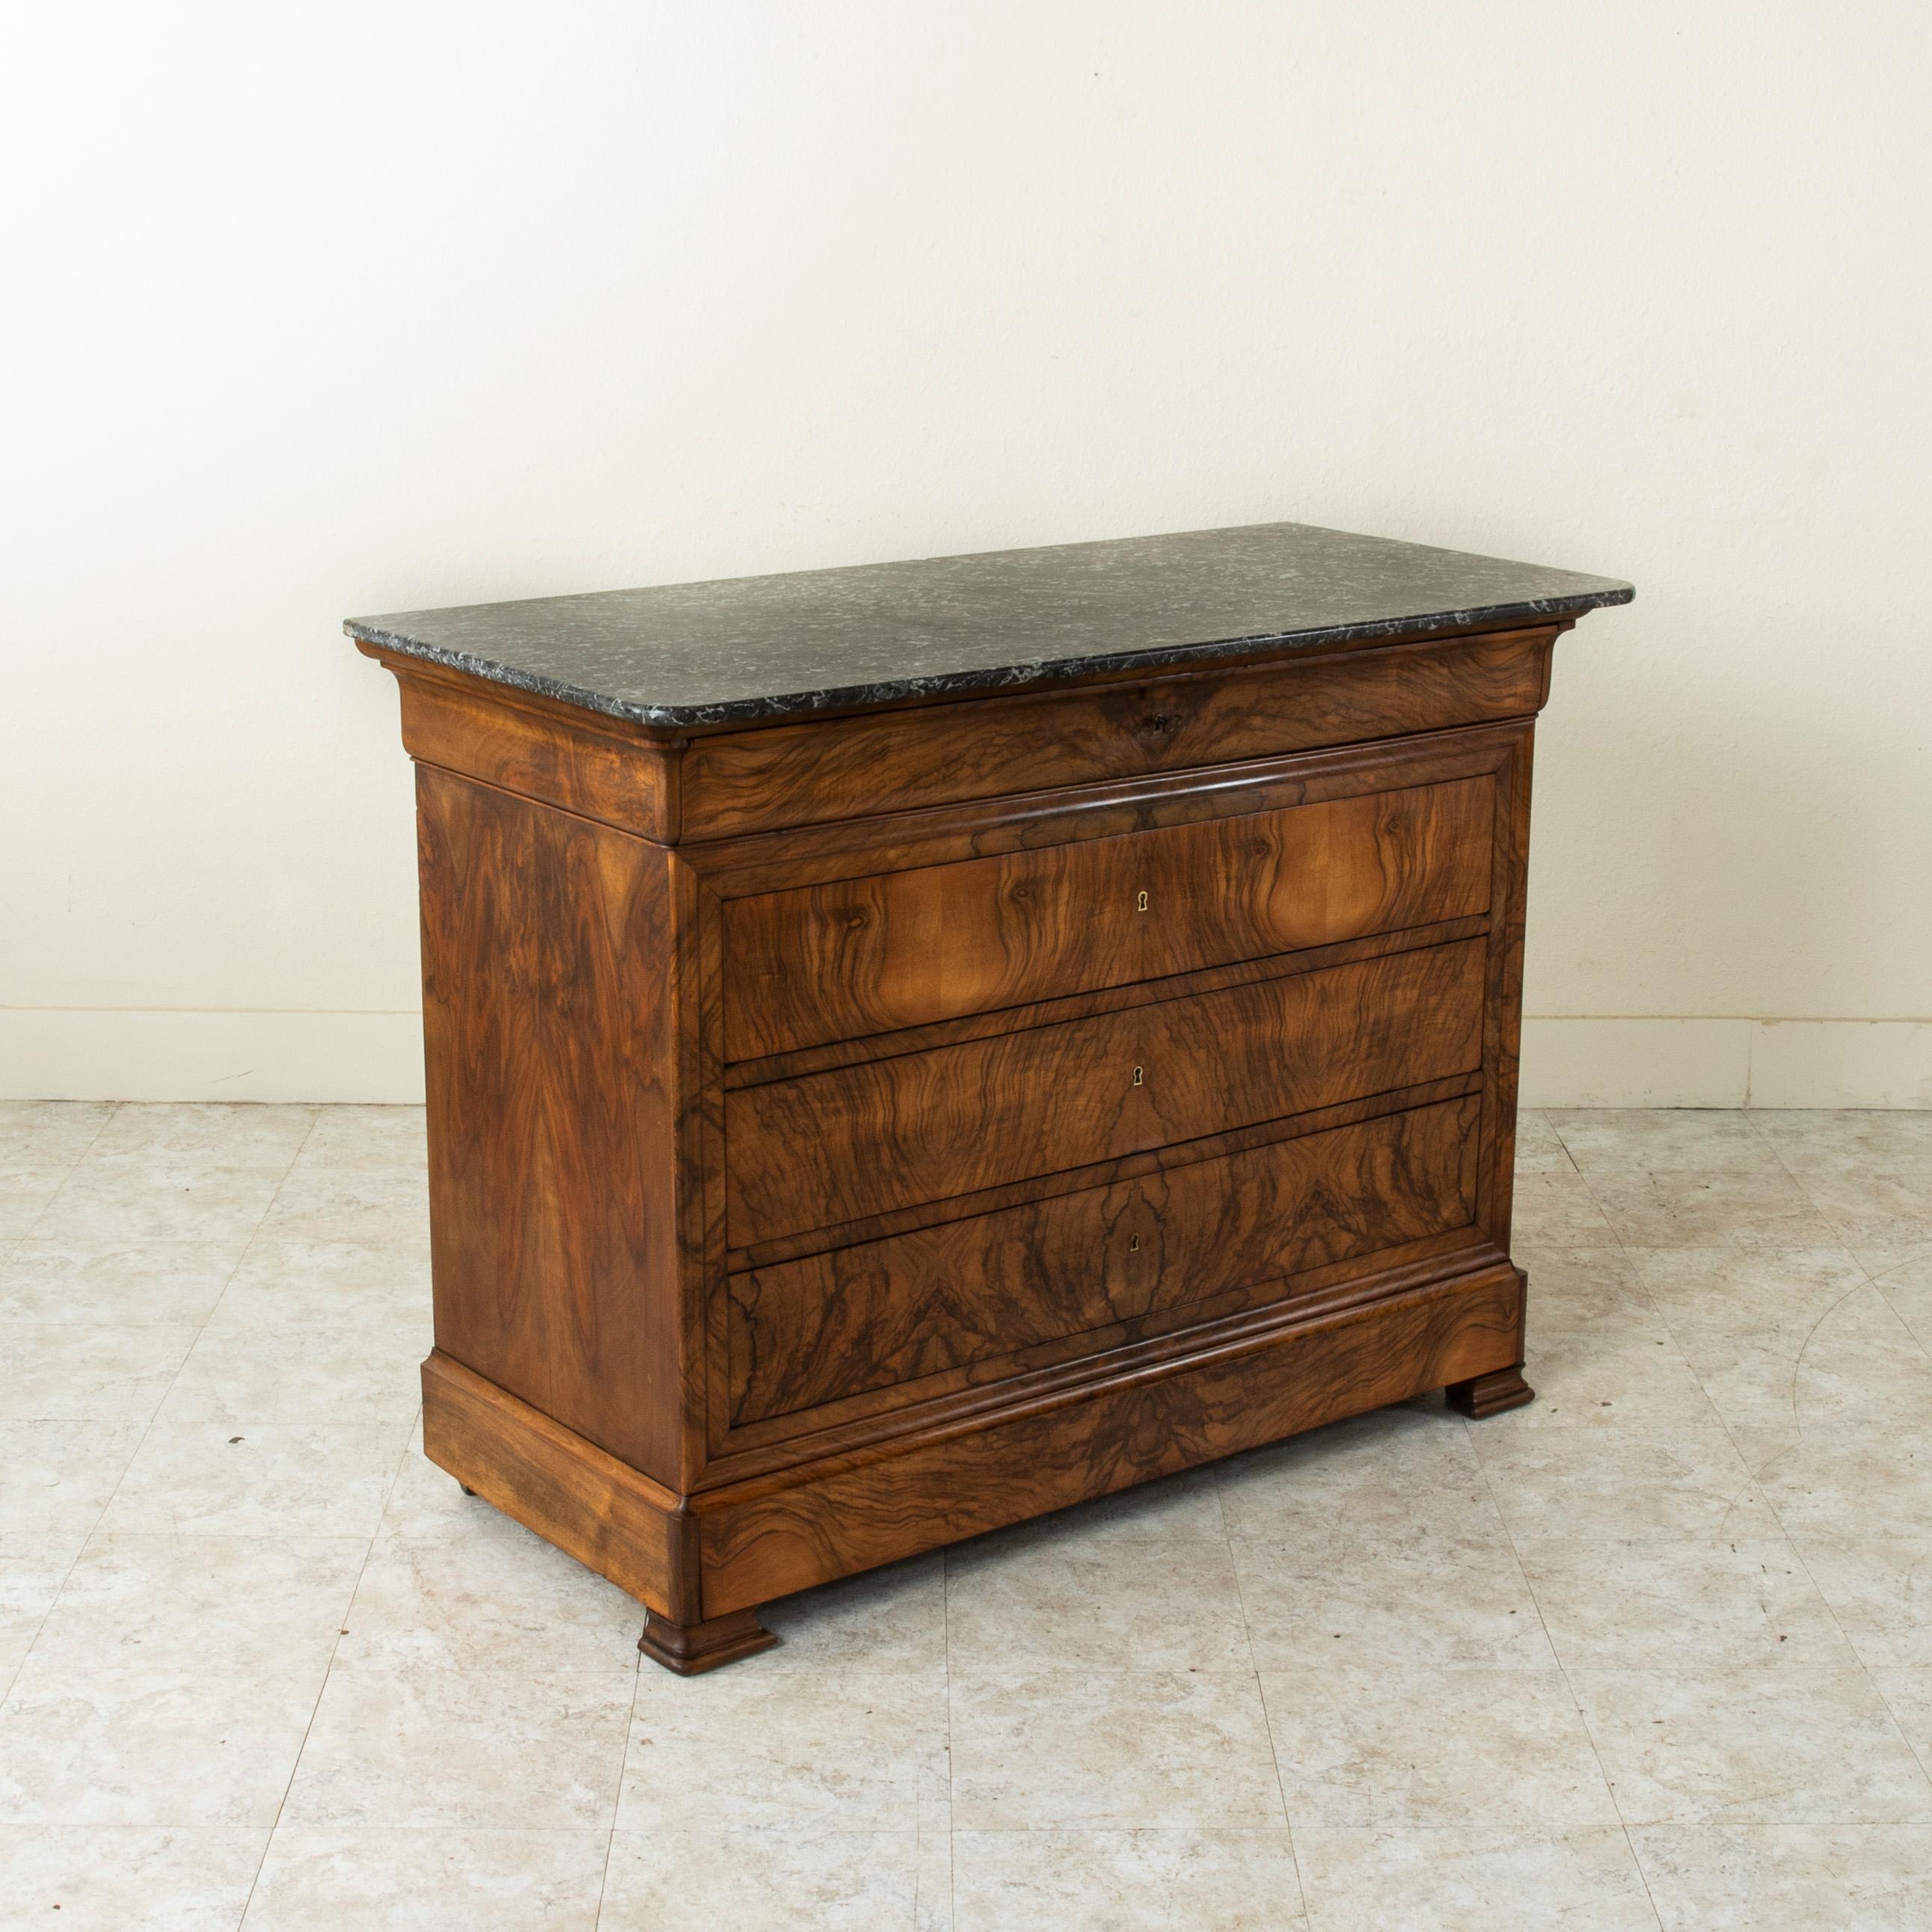 This quintessential Louis Philippe period commode or chest of drawers displays the exemplary craftsmanship of the early nineteenth century with an exterior of bookmatched burl walnut. A testament to the beauty of the wood, this piece is crowned by a